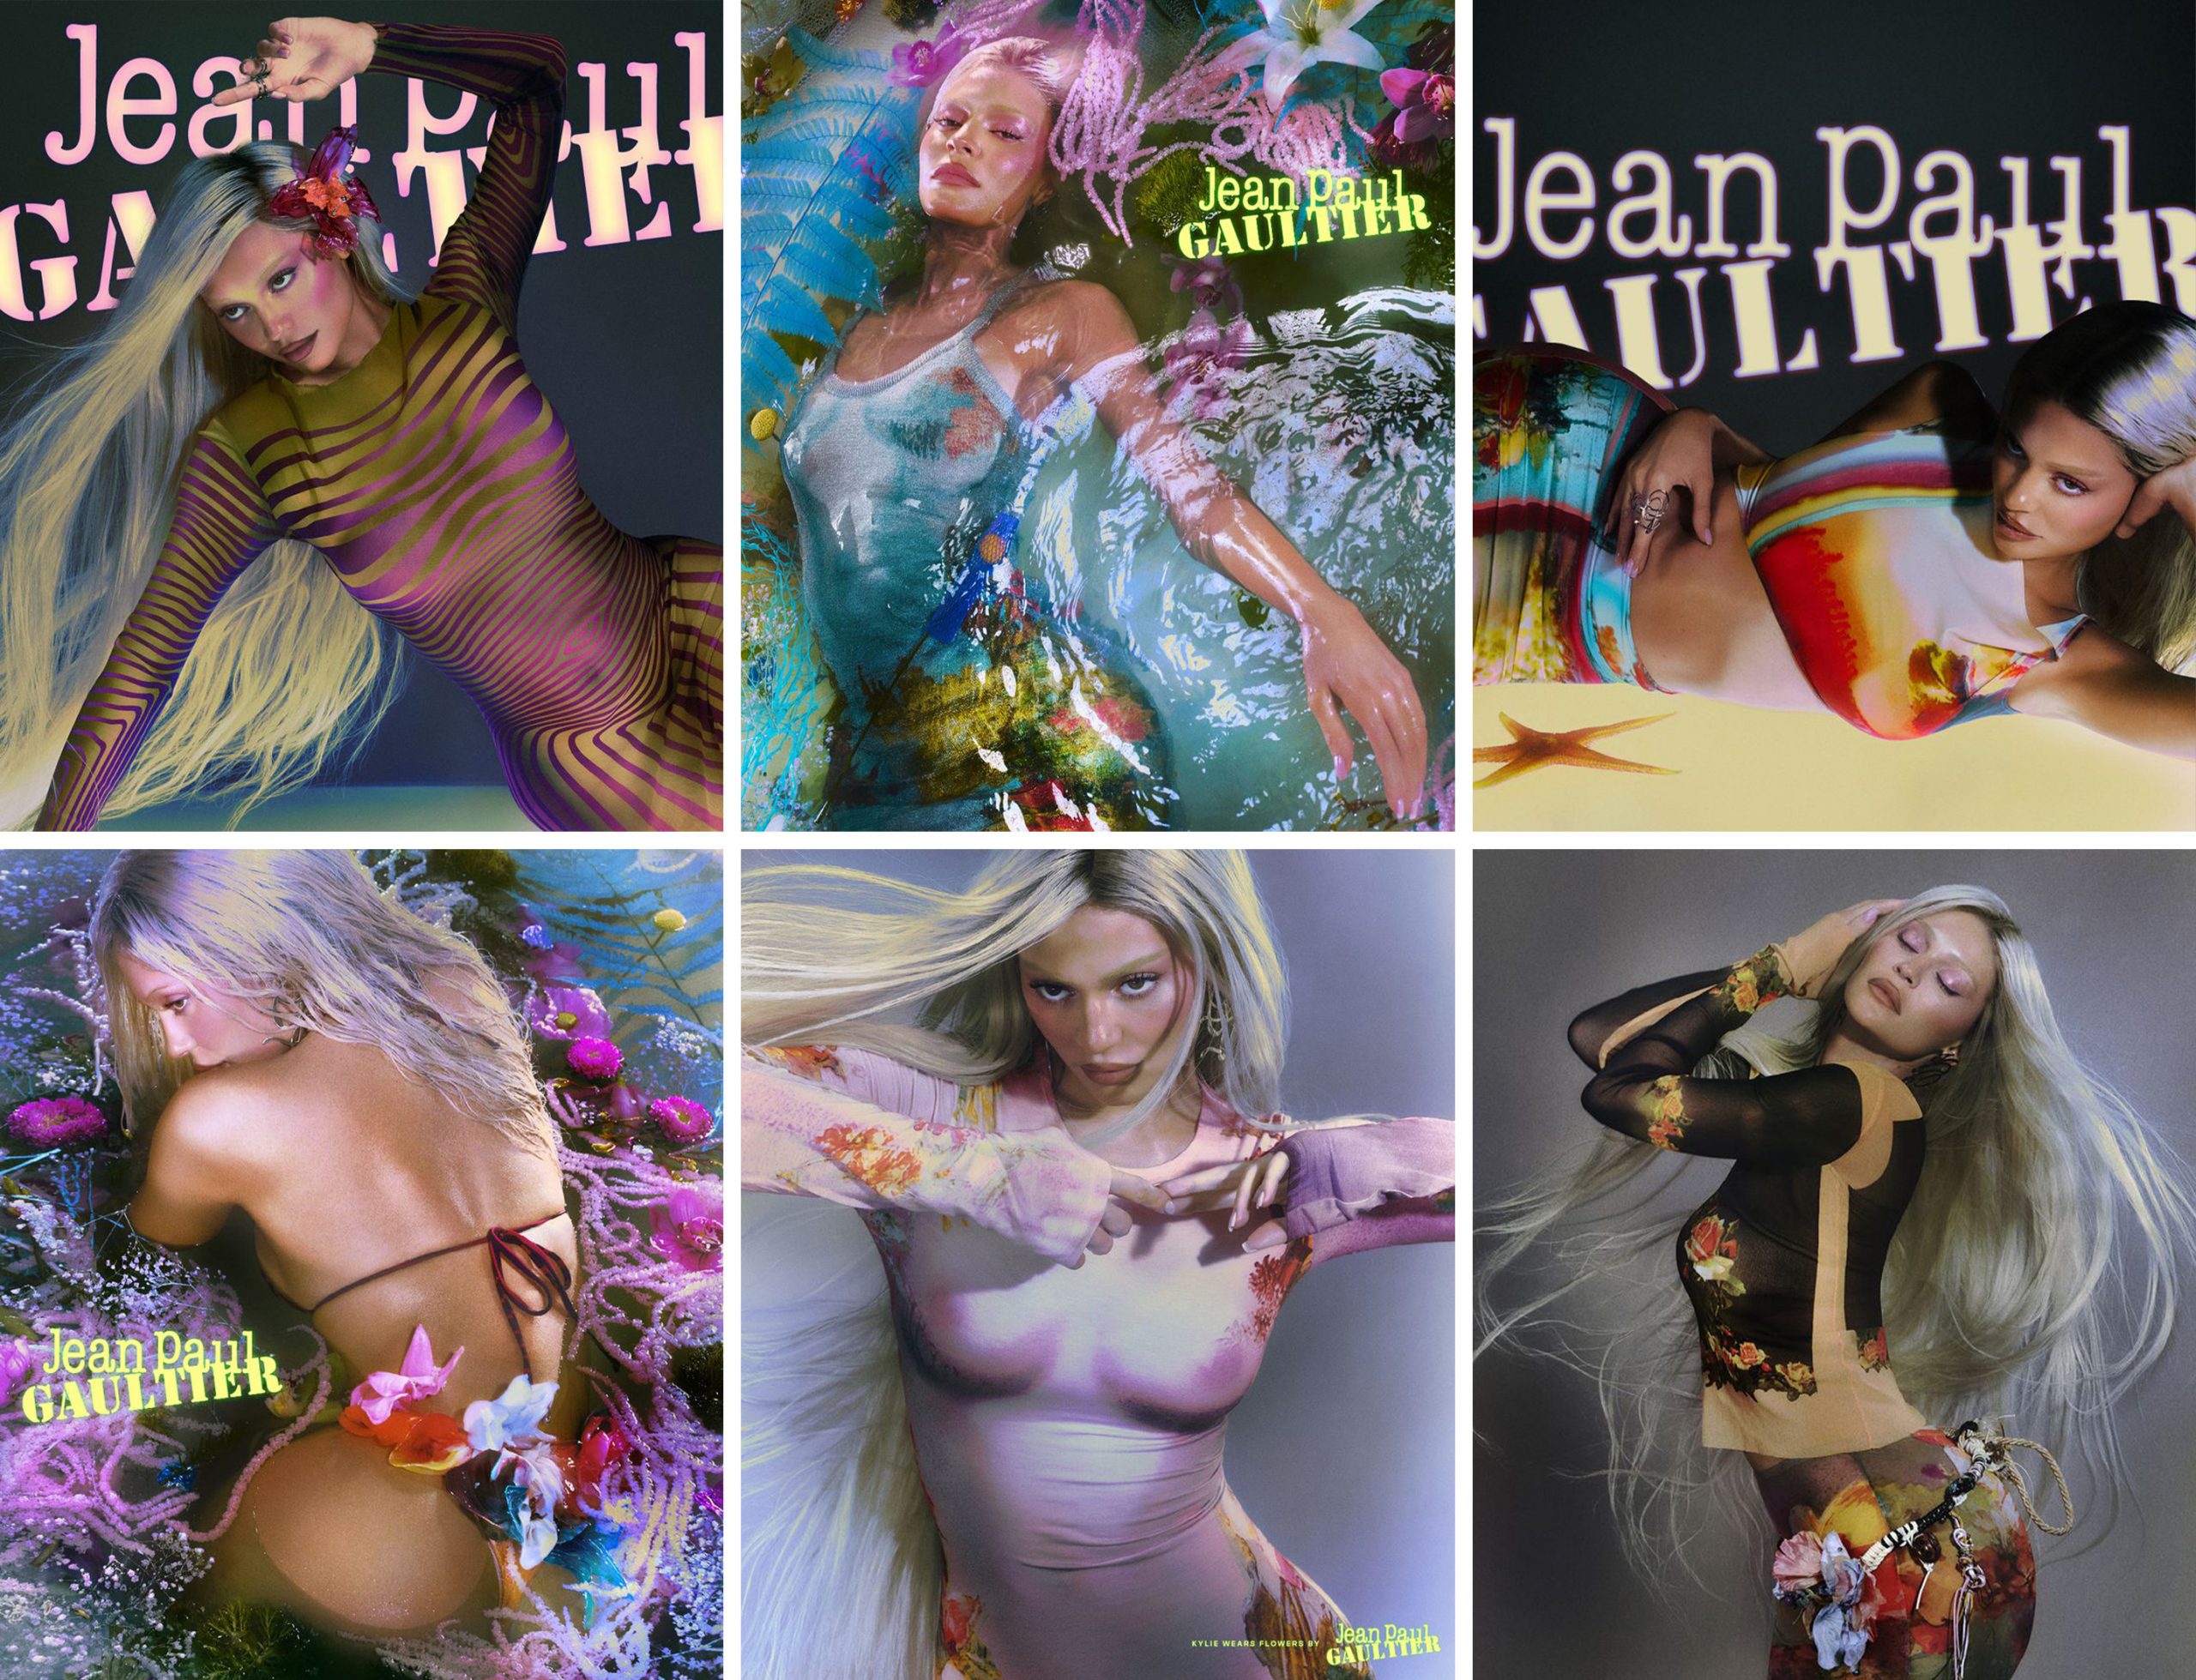 Kylie Jenner Blooms In Jean Paul Gaultier's Enchanting 'Flowers' Collection  Vanity Teen 虚荣青年 Lifestyle & New Faces Magazine